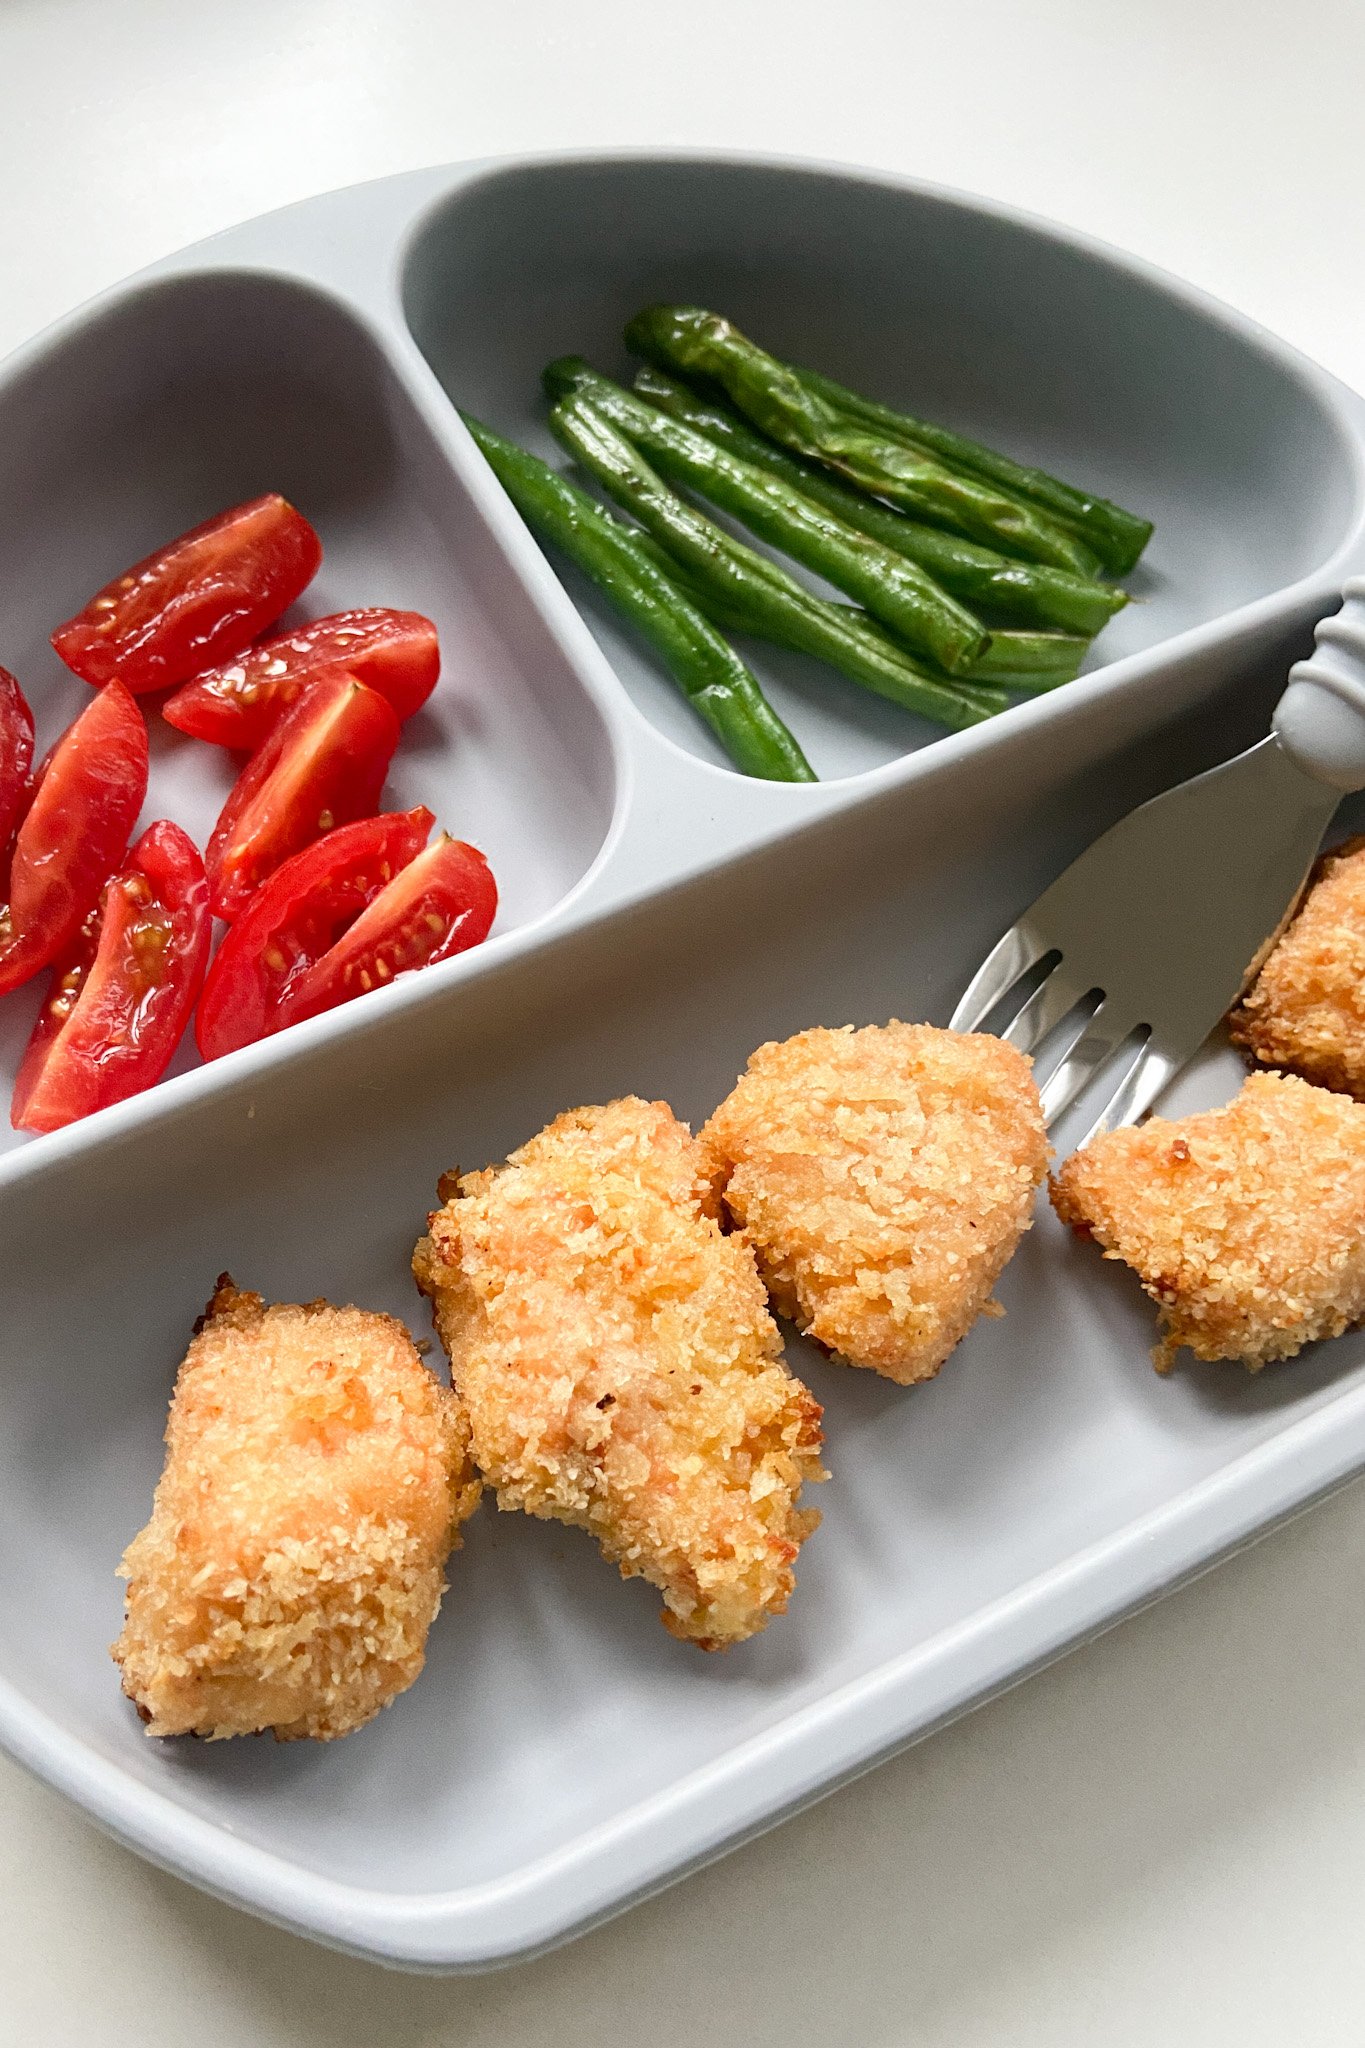 Salmon nuggets served with quartered tomatoes and green beans